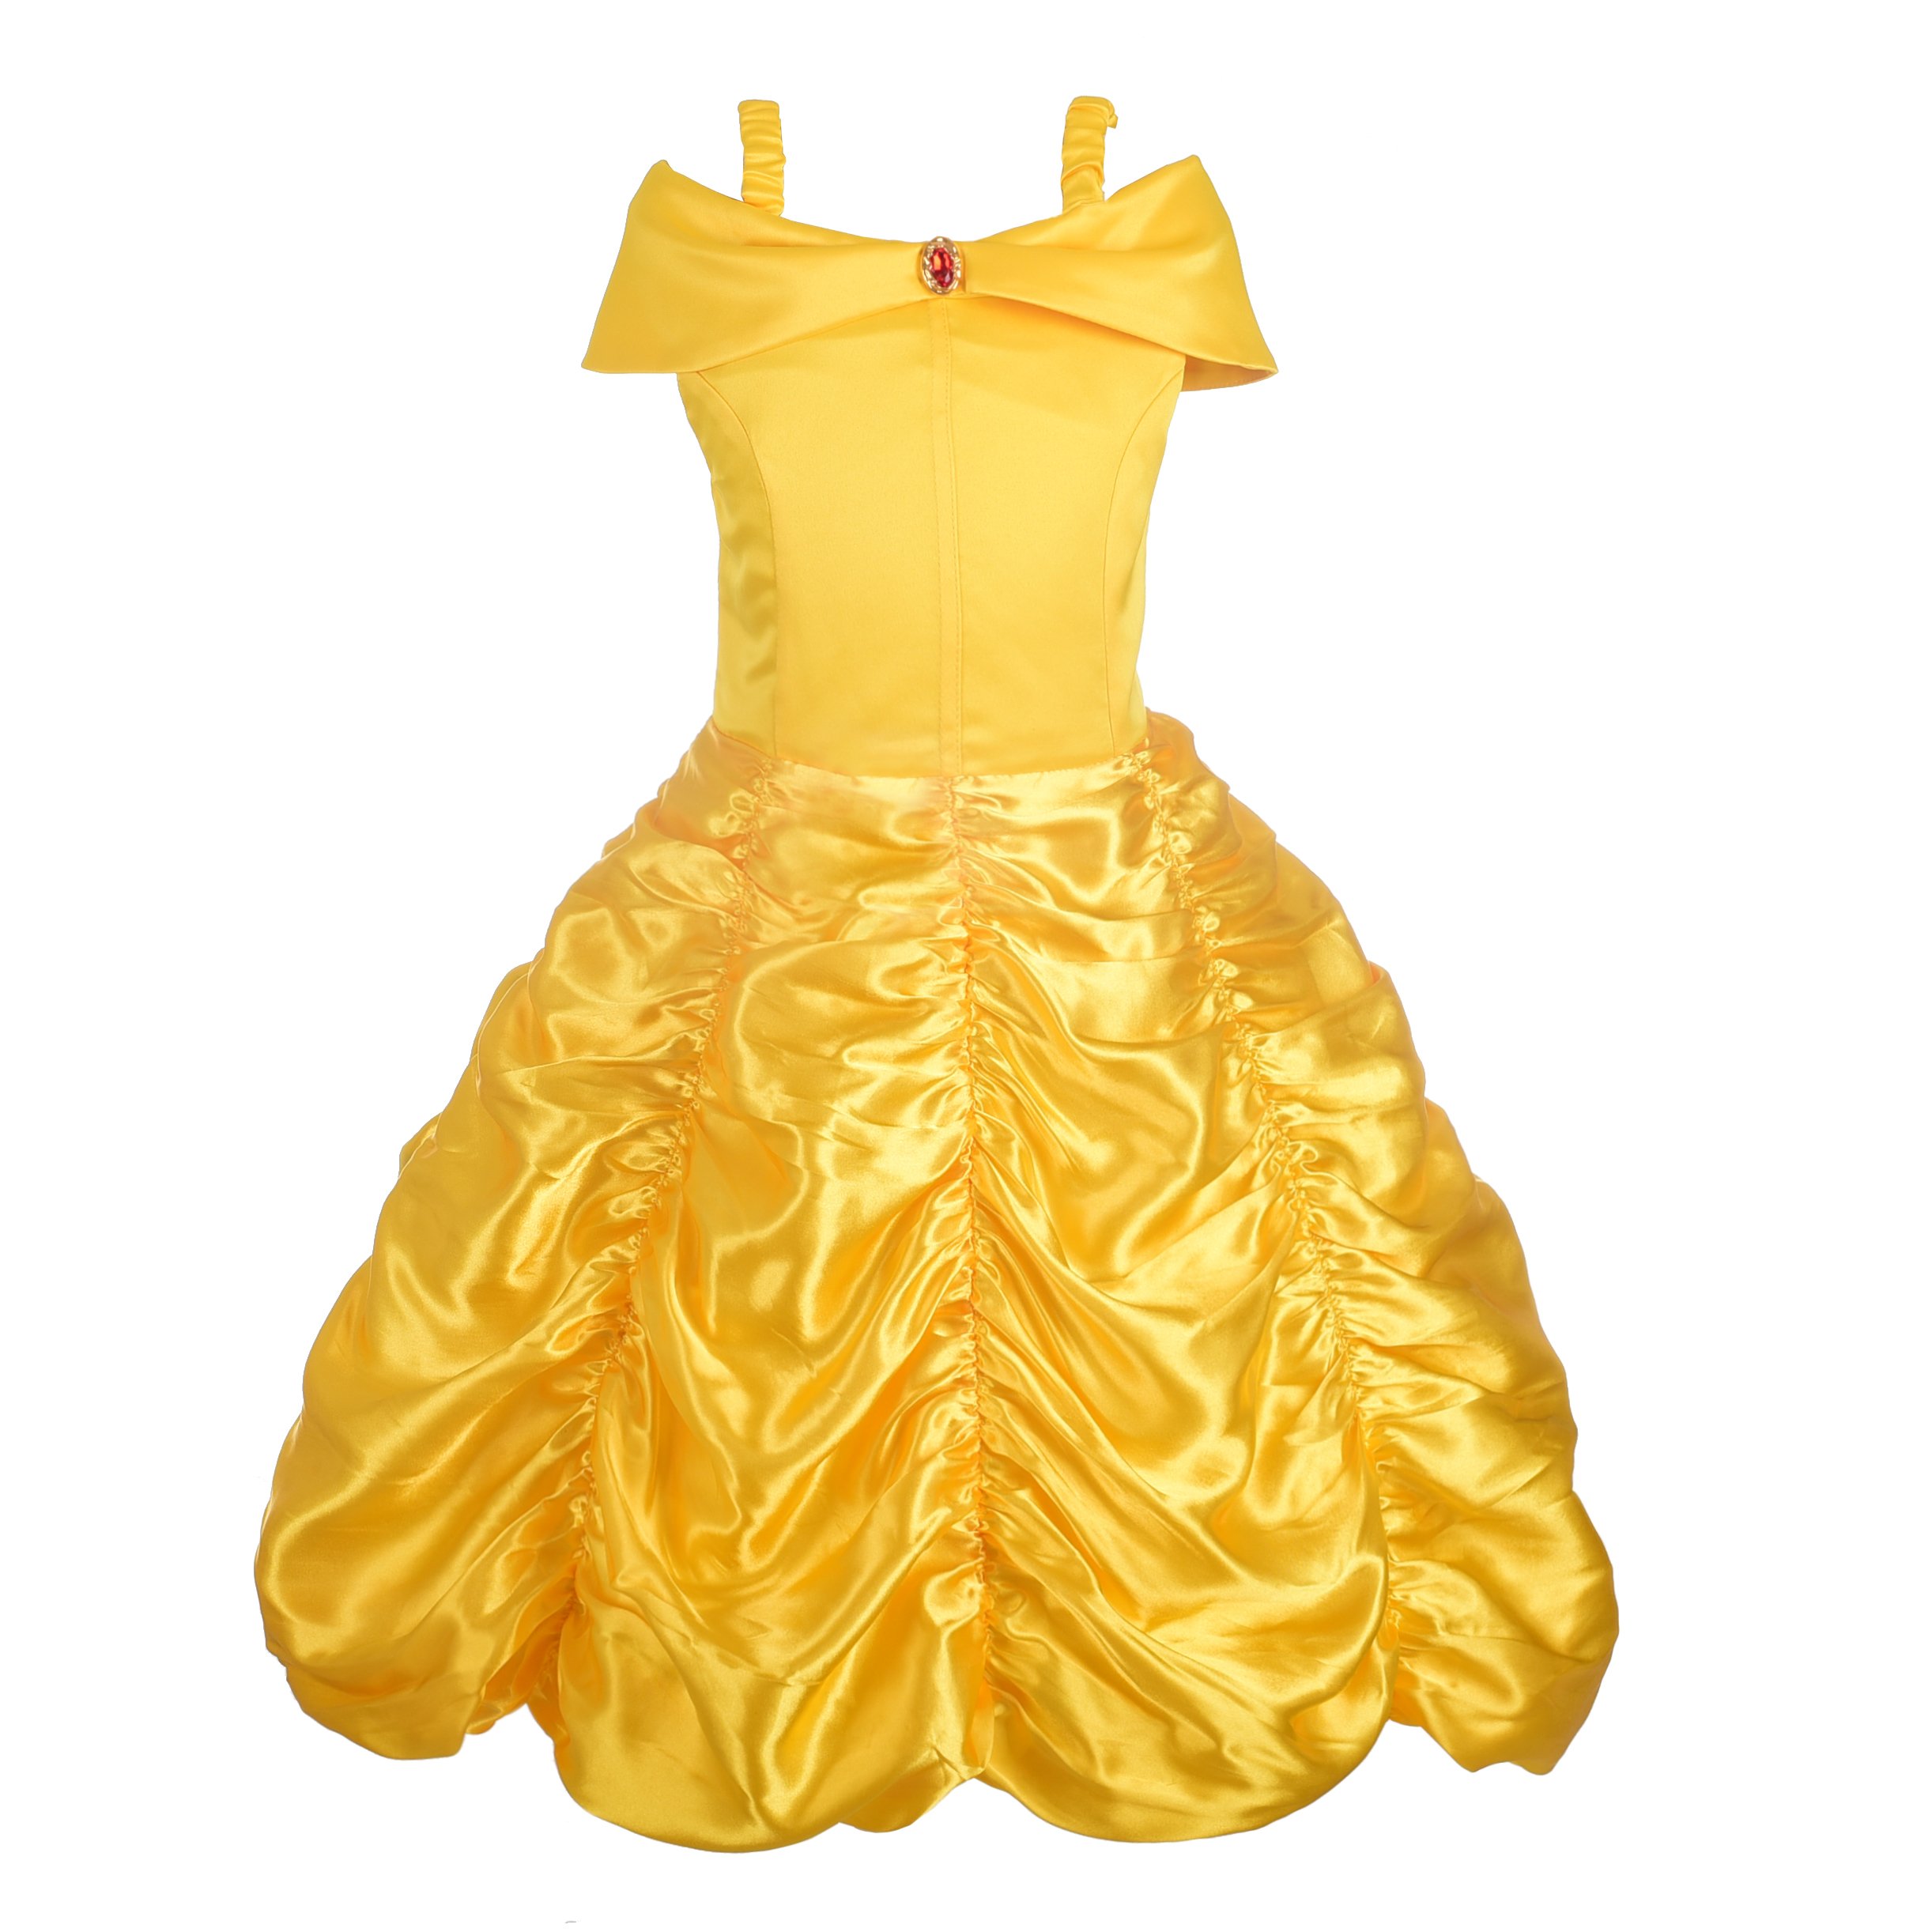 Dressy Daisy Girls' Princess Yellow Gold Ball Gown Birthday Party Fancy Dress Up Halloween Costume Size 18M-12